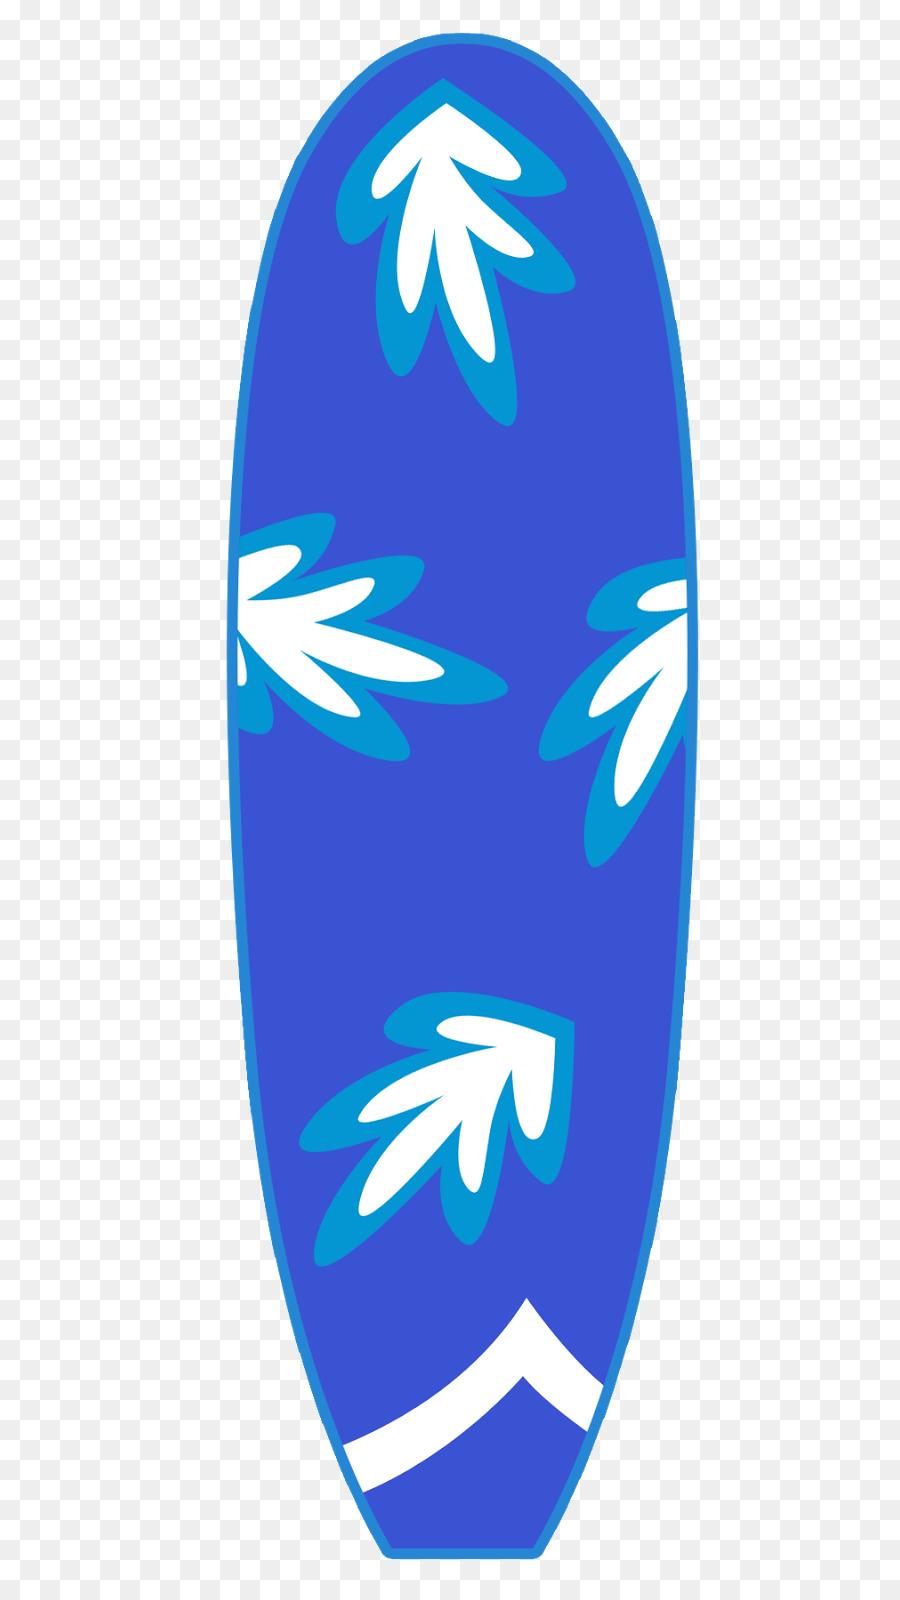 Surfing Surfboard Party Clip art - aloha png download - 708*1600 - Free Transparent Surfing png Download.